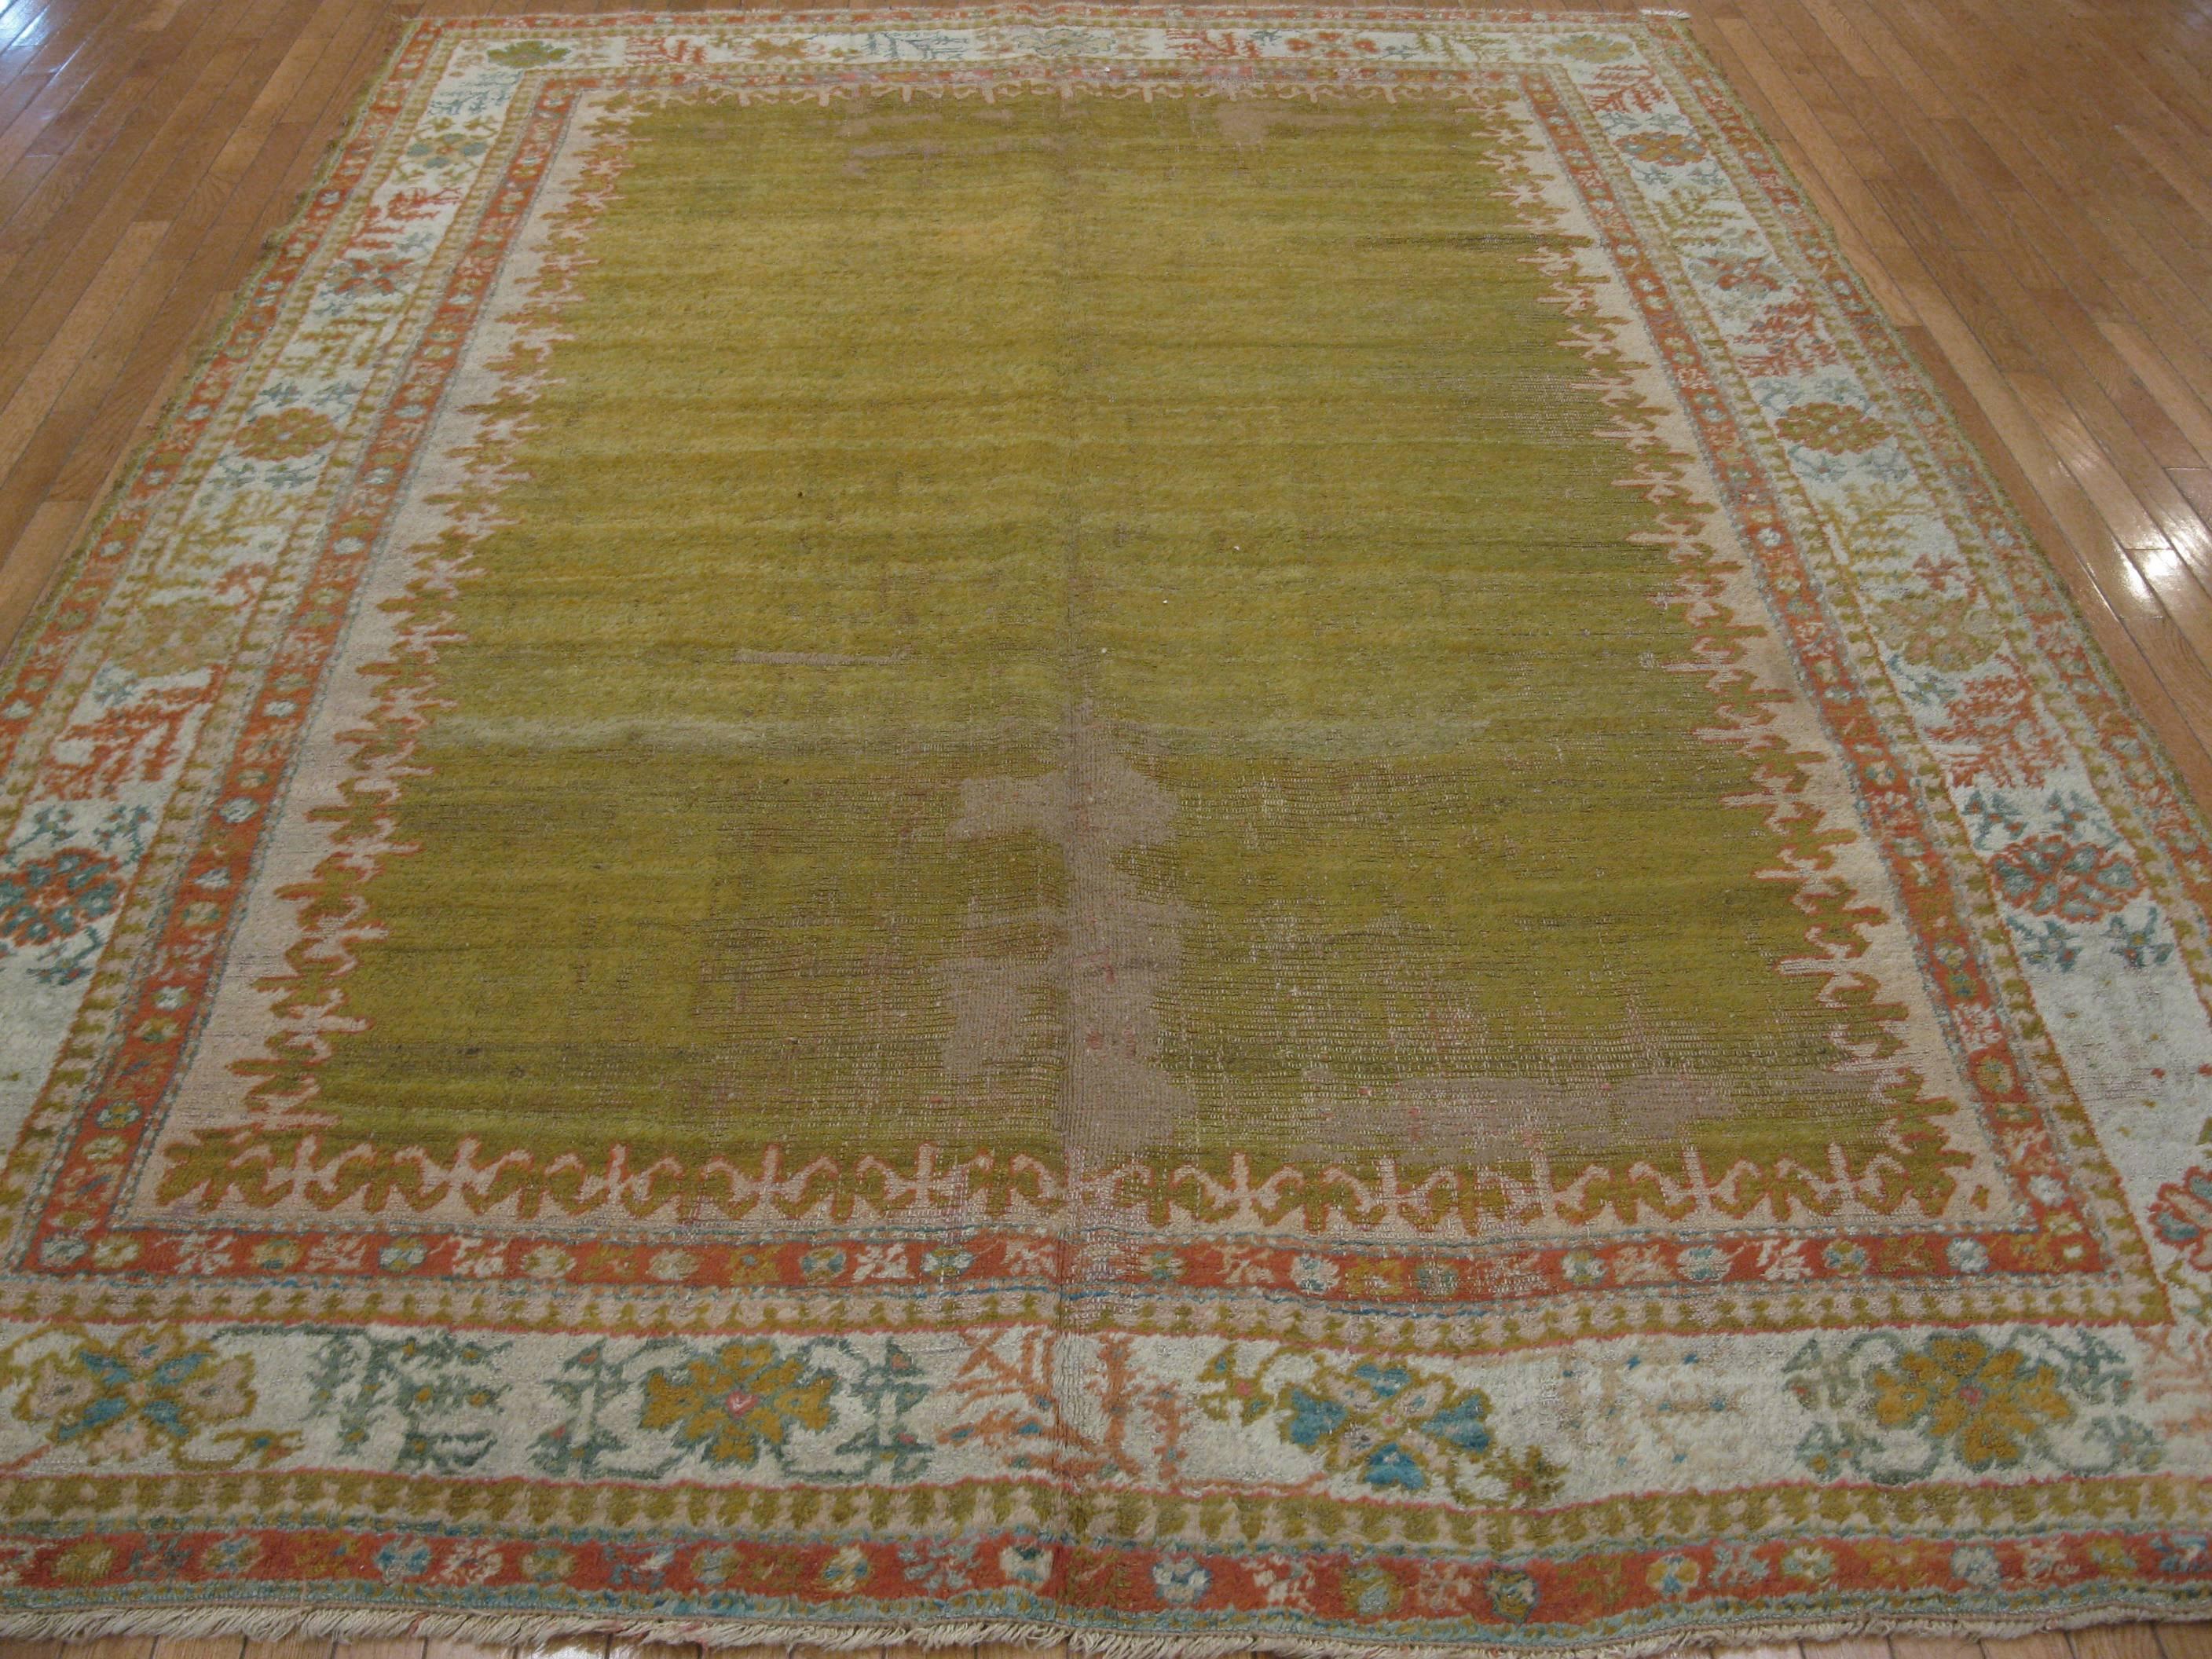 This is an antique  handmade Turkish Oushak rug. It is made with 100% fine angora wool colored with all natural dyes. It measures 7' x 10'.